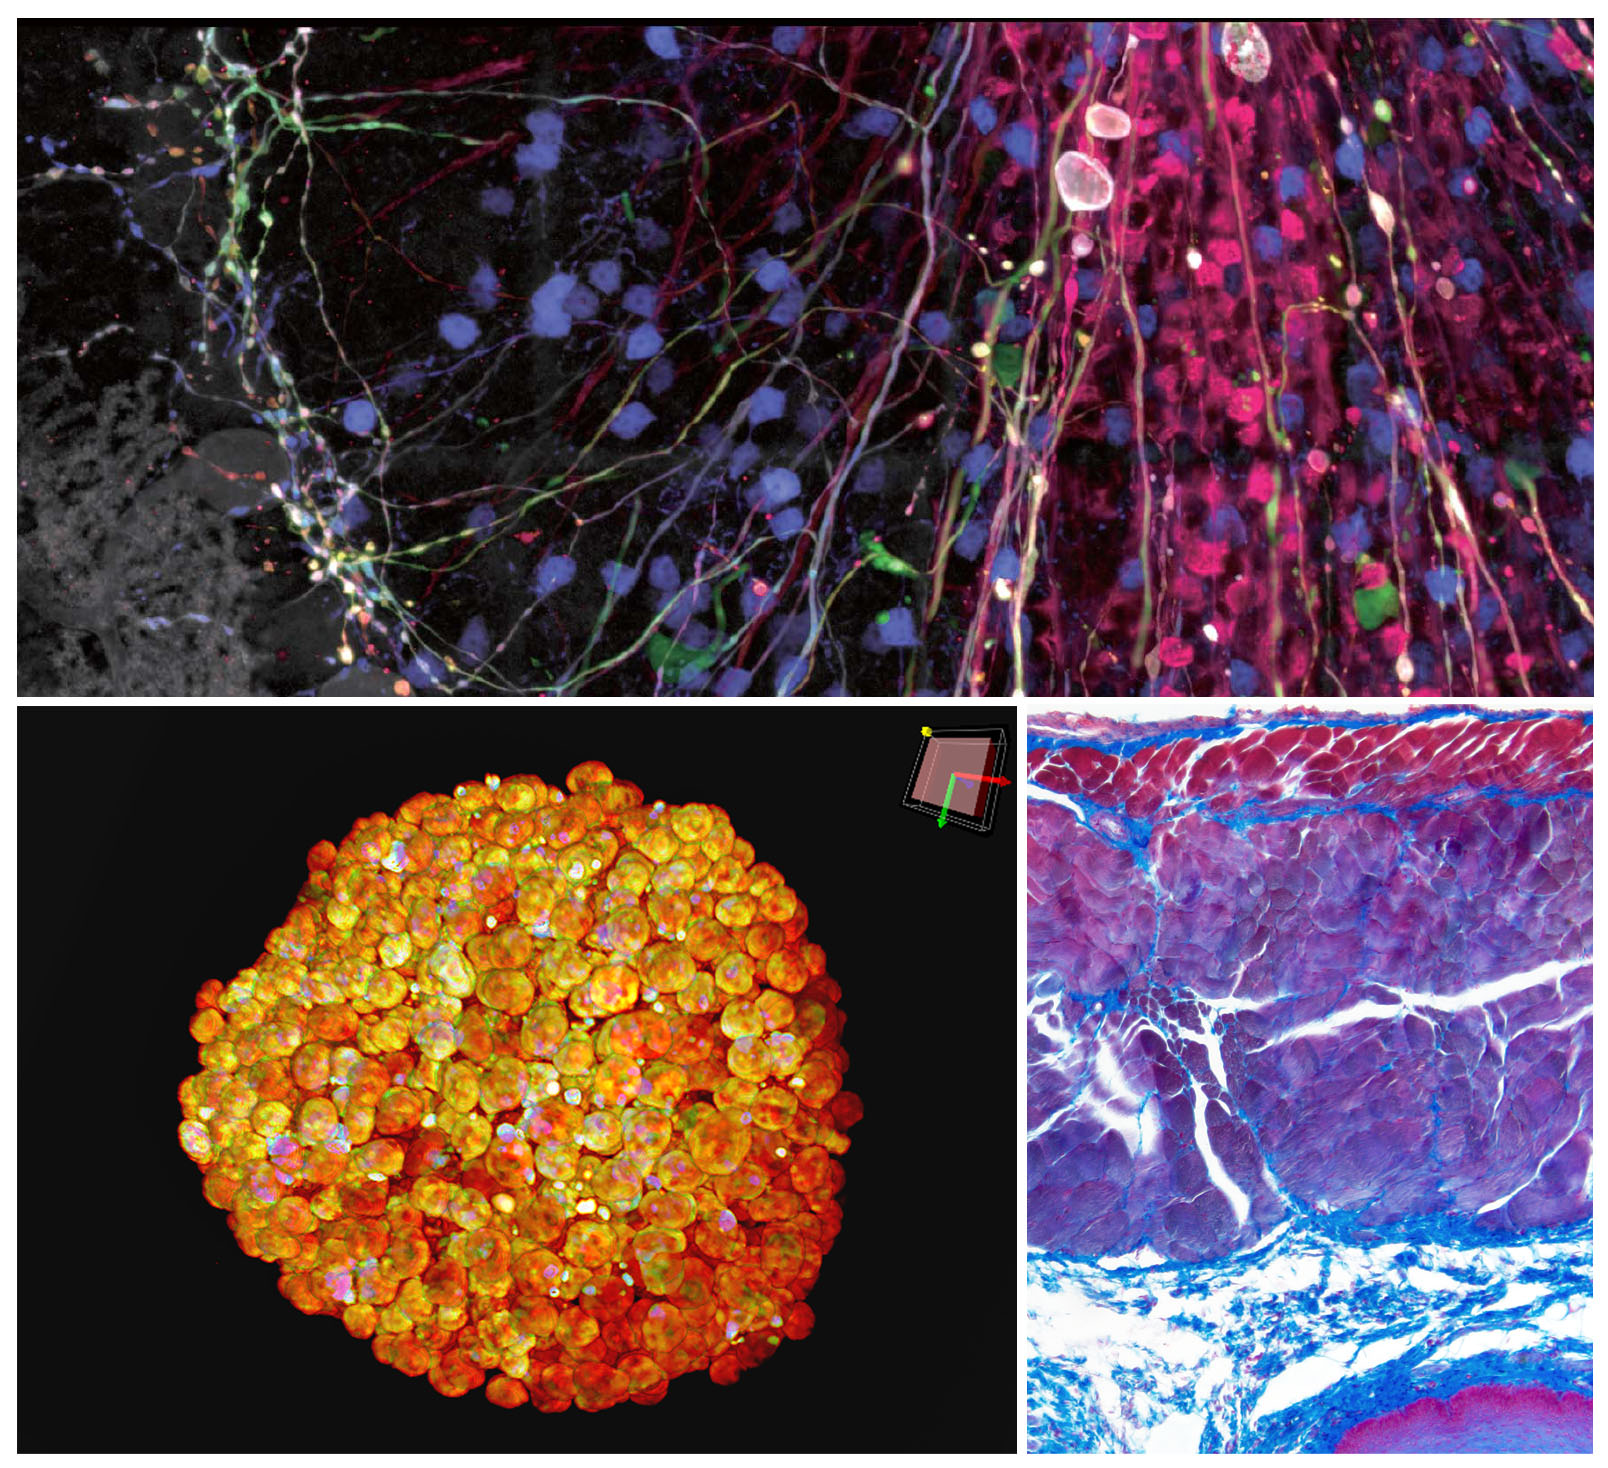 Top: Image of Brainbow AAV transfection of Purkinje cells, amplified with antibodies Purkinje cell somata, dendrites, and axons are visible, as well as some aspecific stainings of granule cells acquired by the FV3000 microscope         Bottom left: Cleared spheroid of HT-29 cells stained with DAPI (nuclear) acquired by the Olympus IXplore Spin system         Bottom right: Azan stained captured by the DP74 digital microscope camera